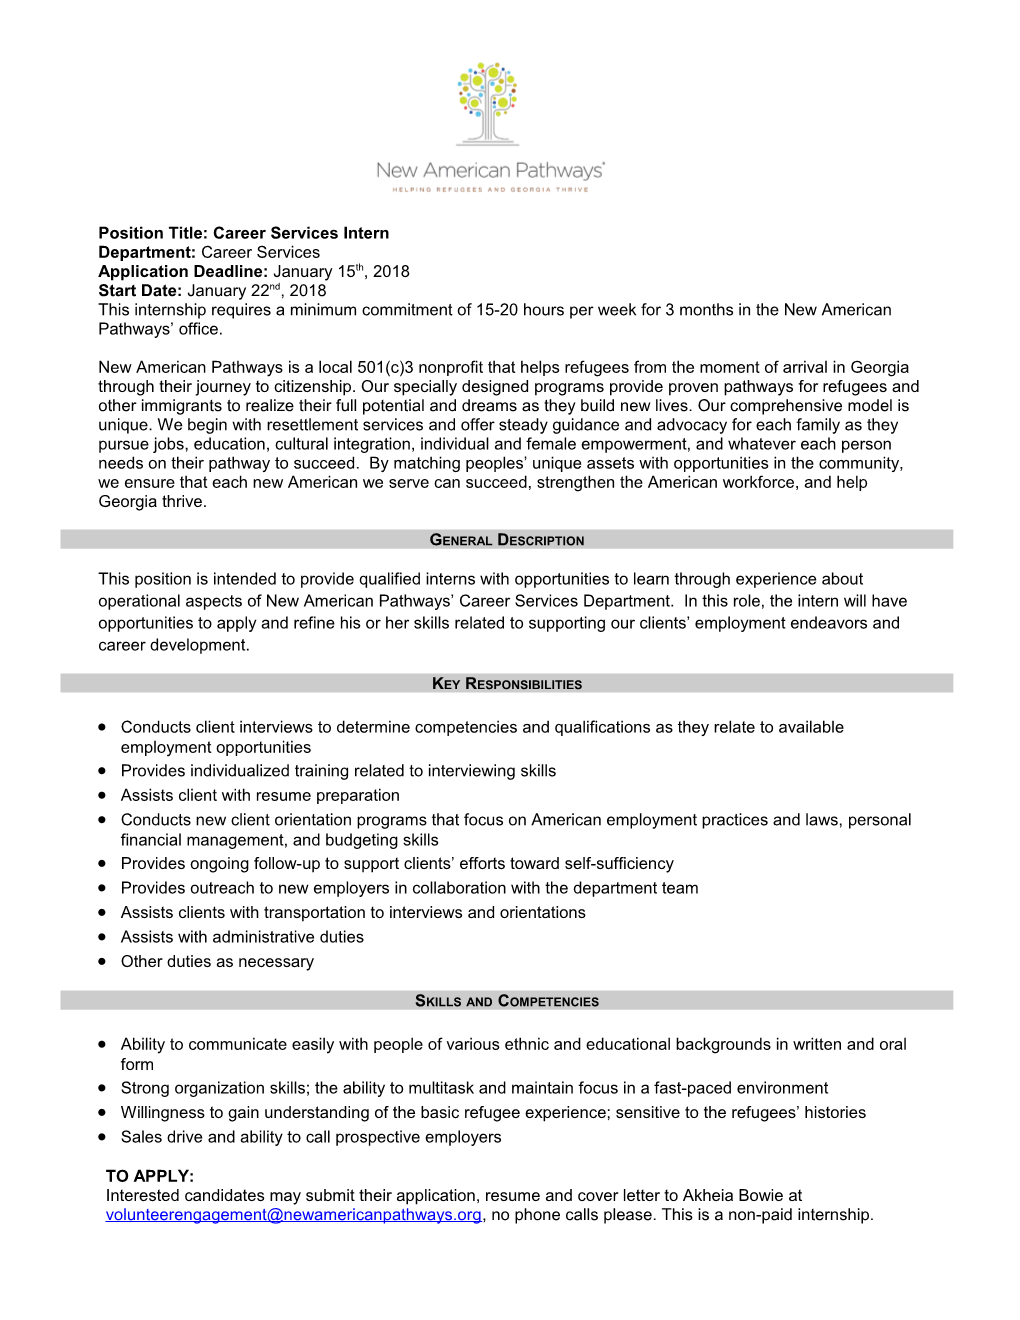 Position Title: Learning Center Programs Coordinator s2